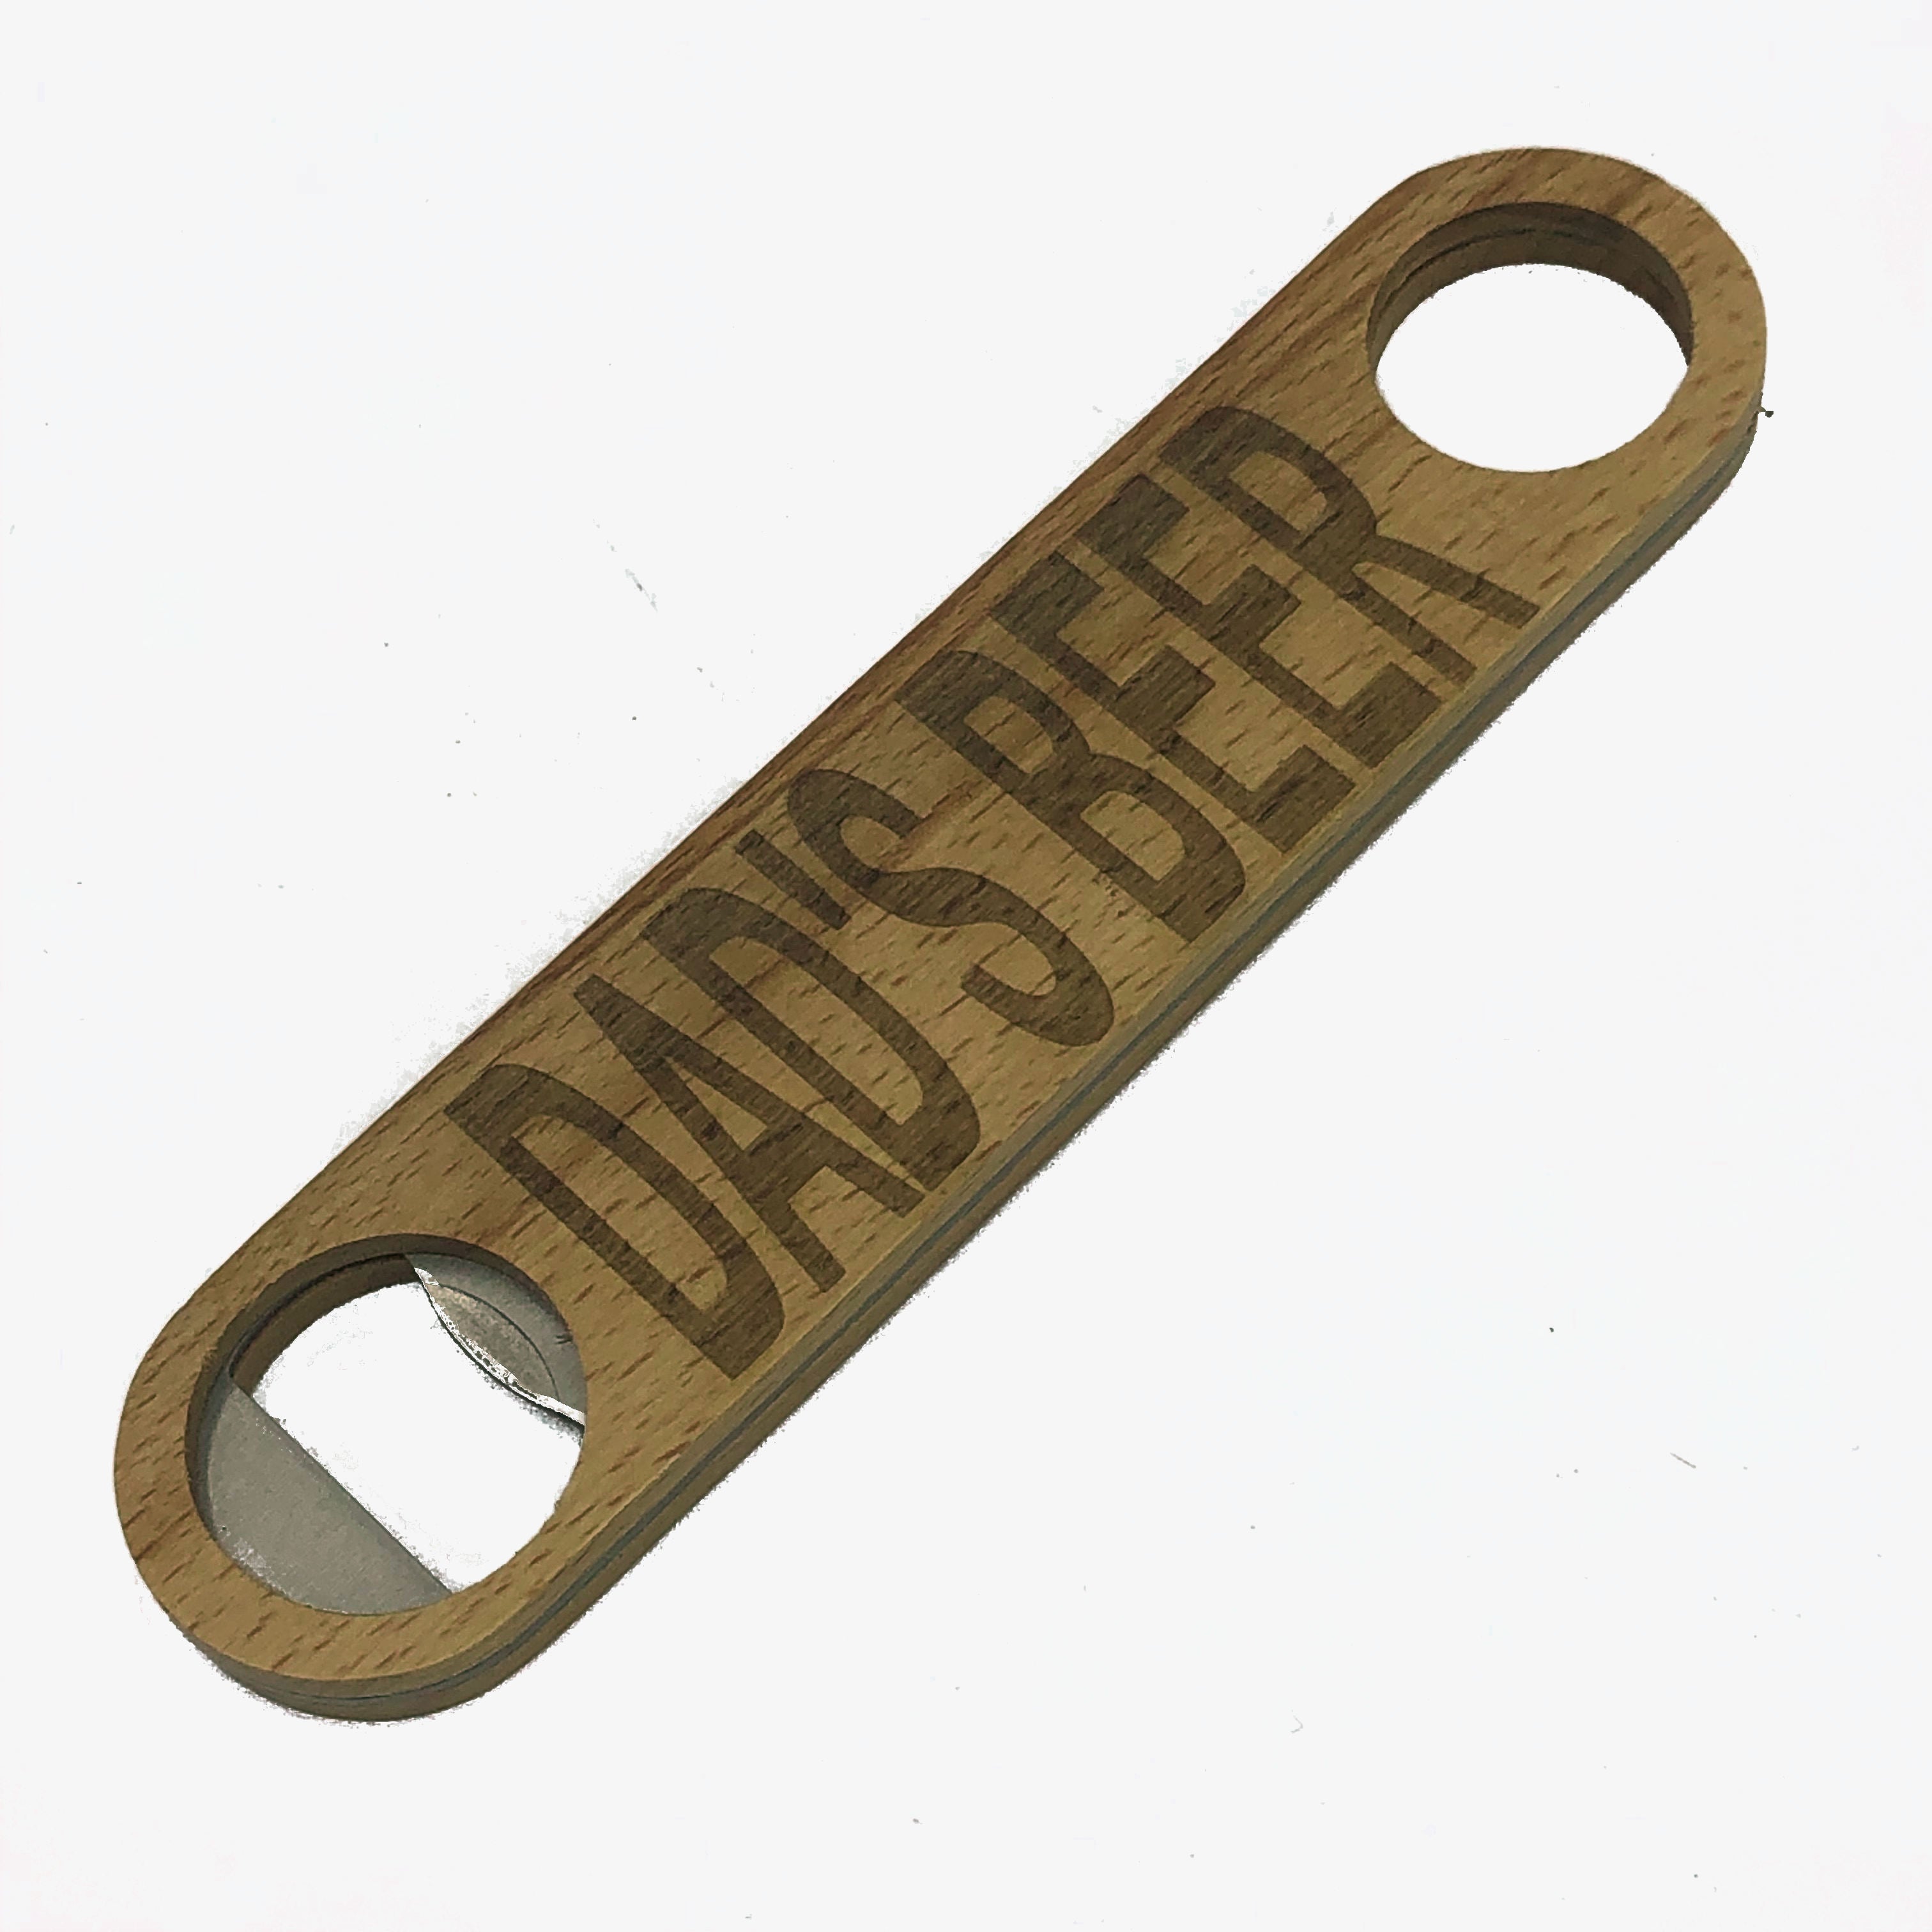 Wooden bottle opener gift for father - dad's beer